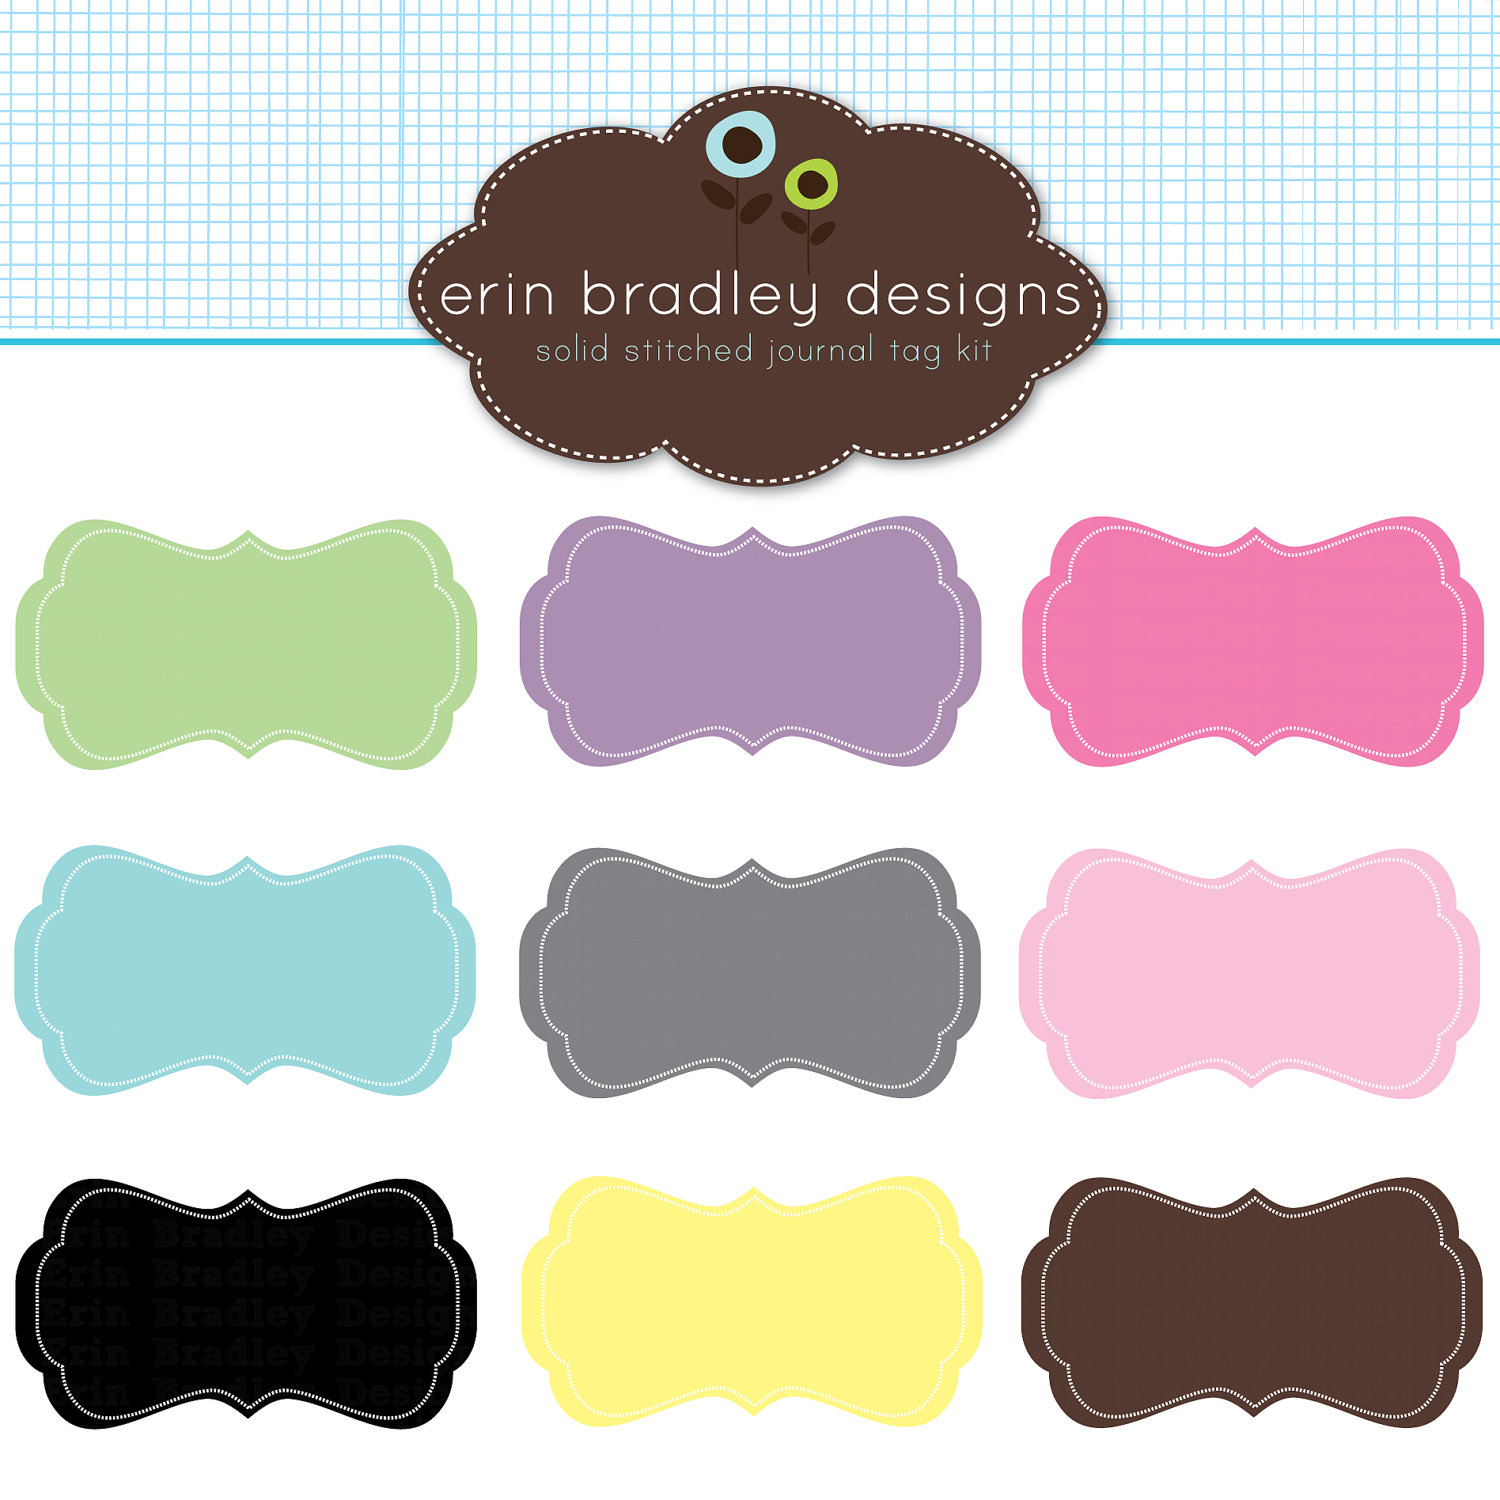 free clipart downloads for scrapbooking - photo #21